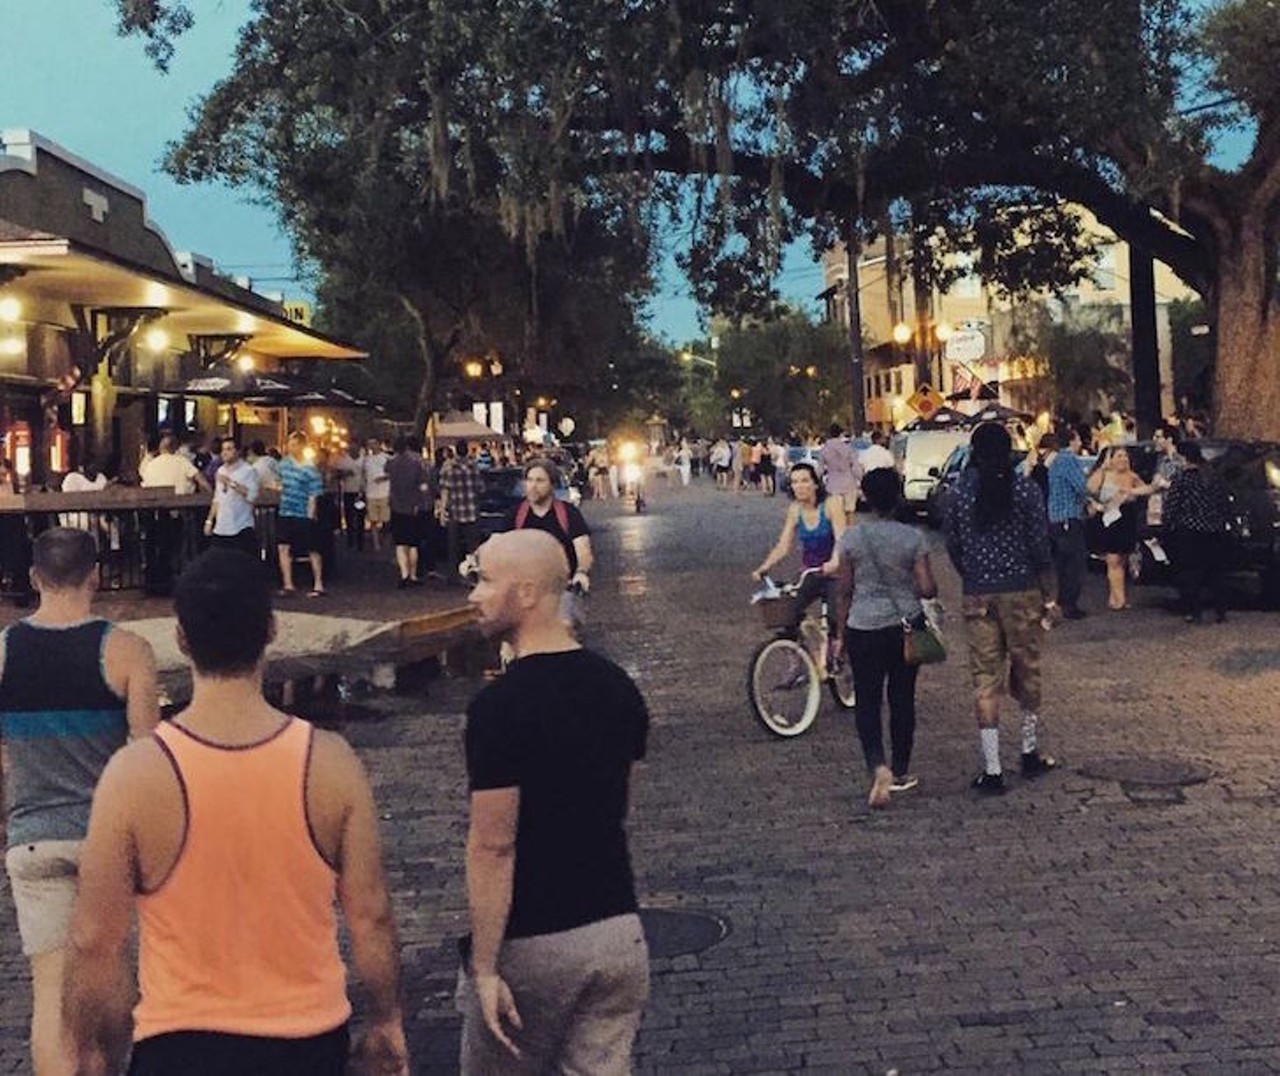 Thursday, Oct. 12 
Second Thursday Art and Wine Walk 
Walk around Thornton Park to check out art and wine at various stops. Second Thursday of every month, 6:30 pm; Thornton Park, Summerlin Avenue and Washington Street; $15; thorntonparkdistrict.com
Photo via joedematei/Instagram